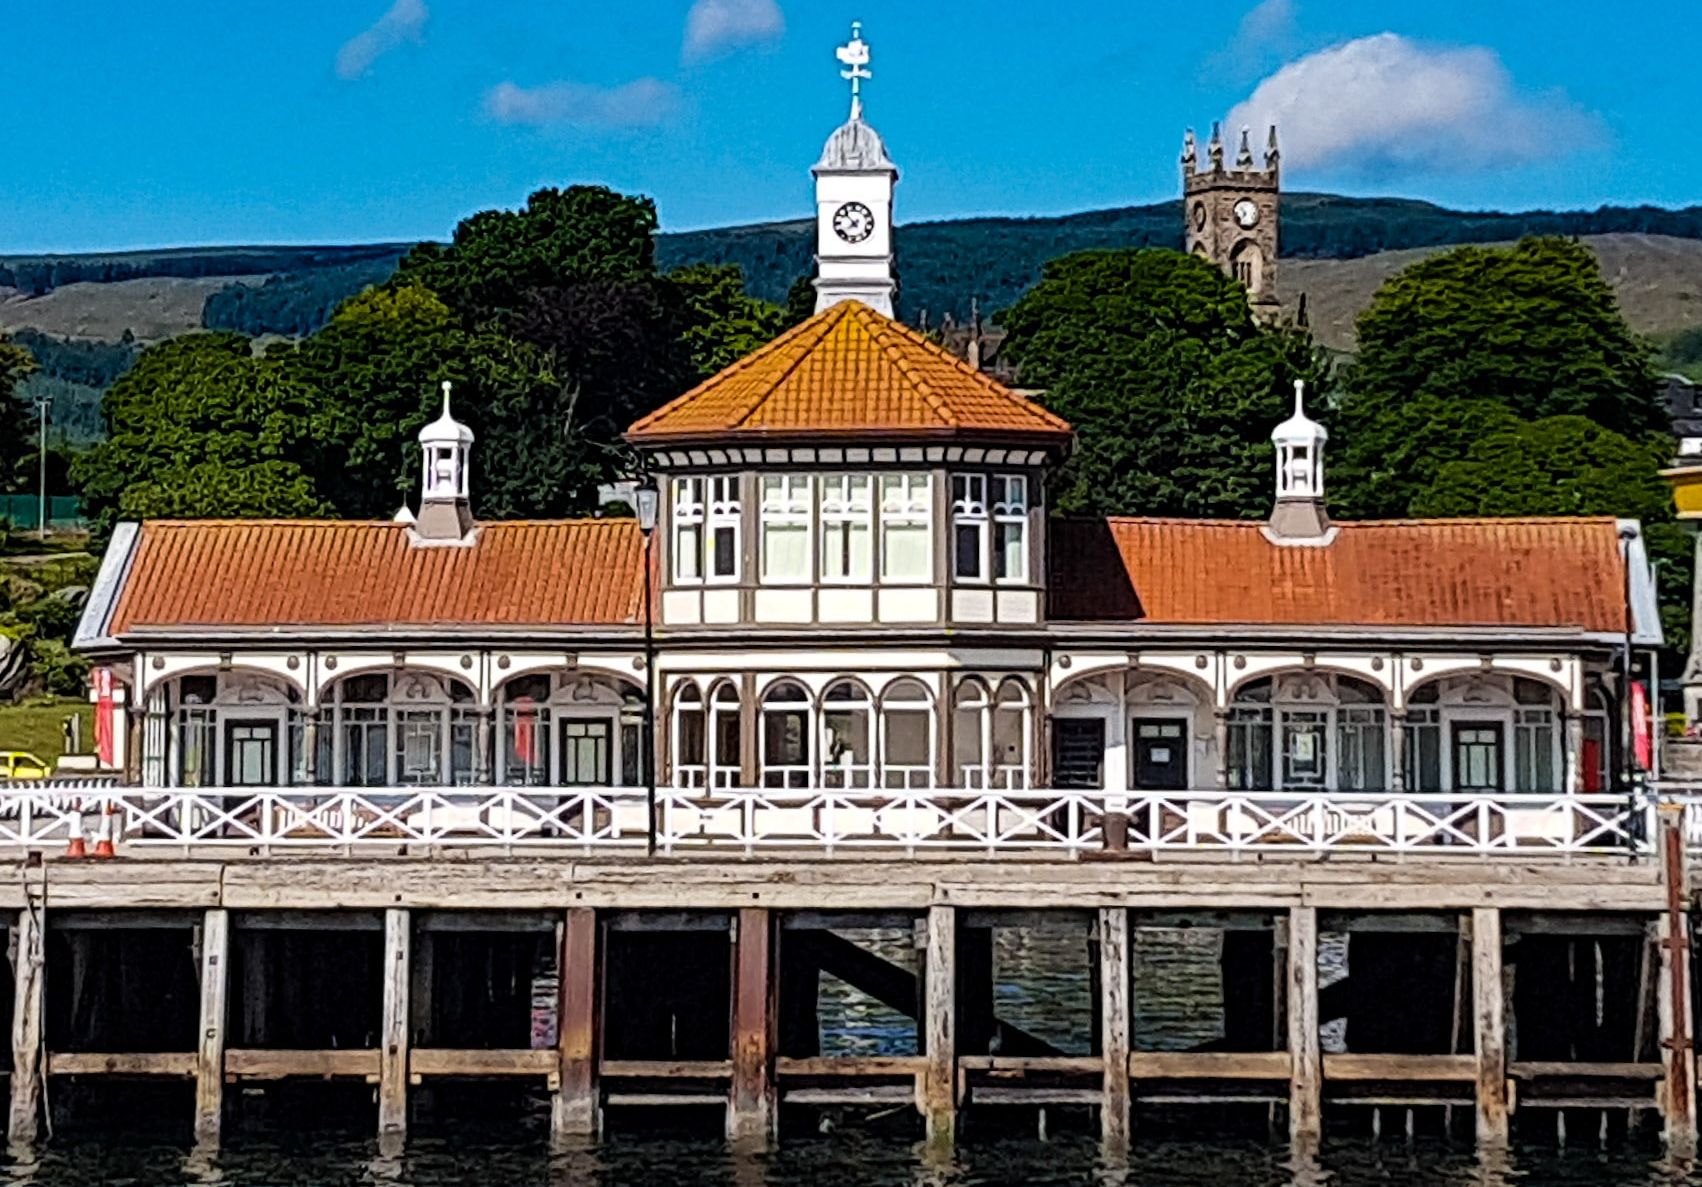 The old Victorian pier at Dunoon